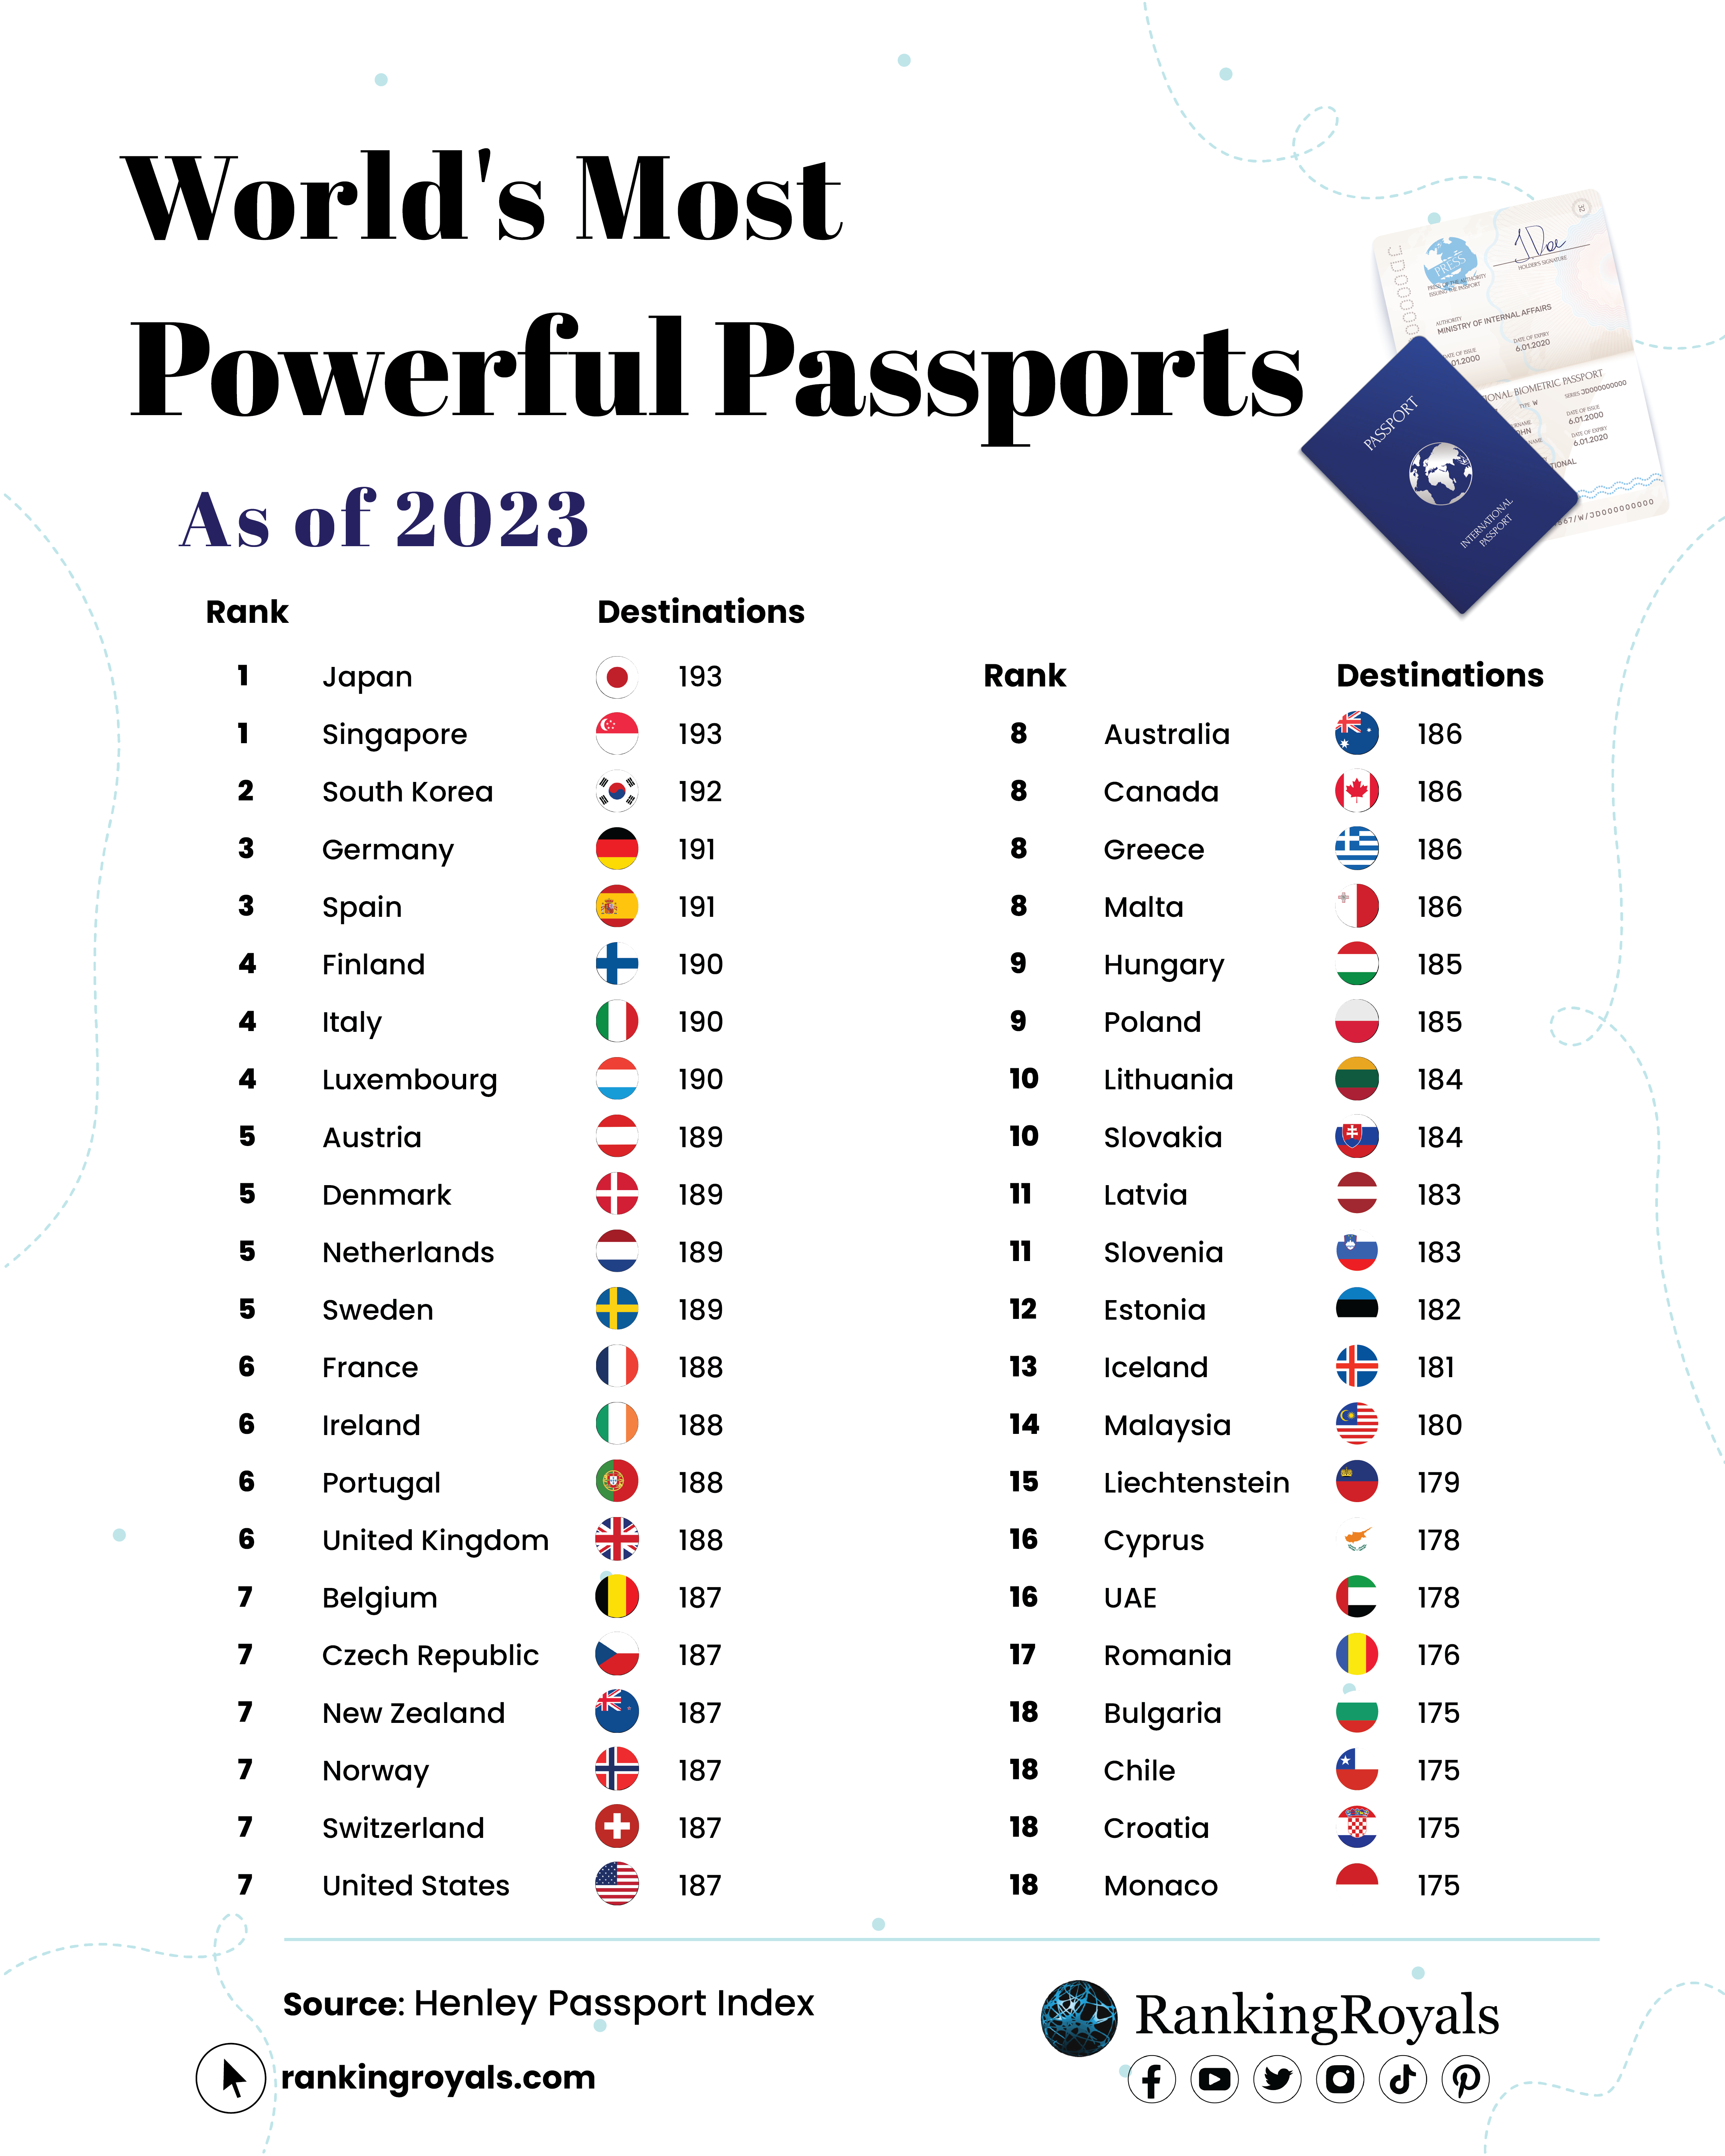 What are the top 3 strongest visa in the world?